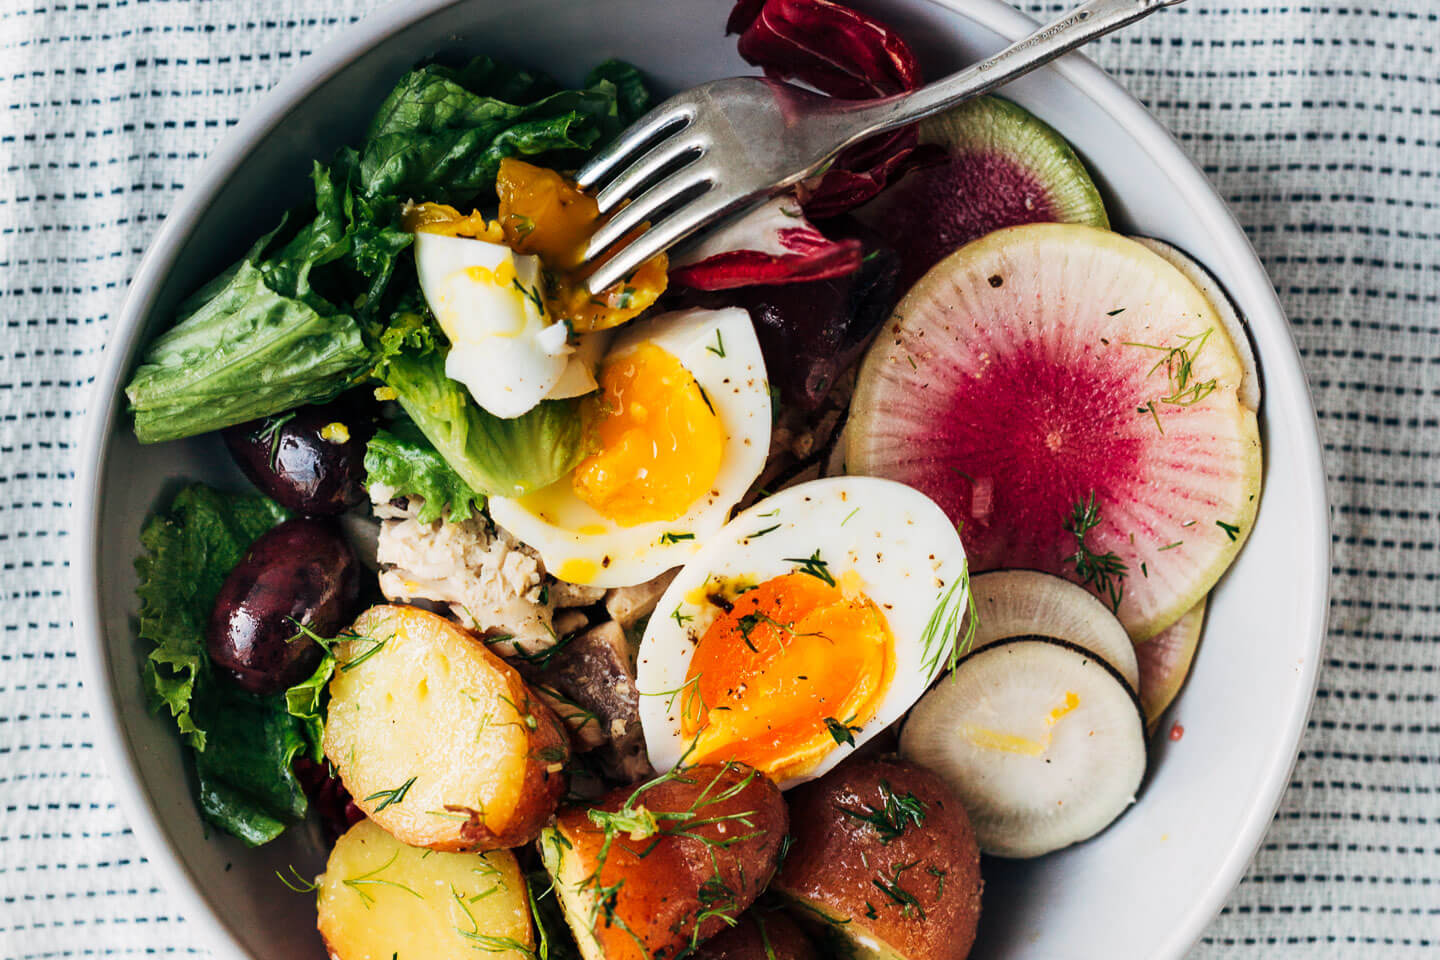 This winter Nicoise-ish salad hits all the right notes with crunchy shaved fennel and radishes, greens and radicchio, tender new potatoes suffused with herbs and a punchy vinaigrette, just-set 7-minute steamed eggs, and piles of olives.